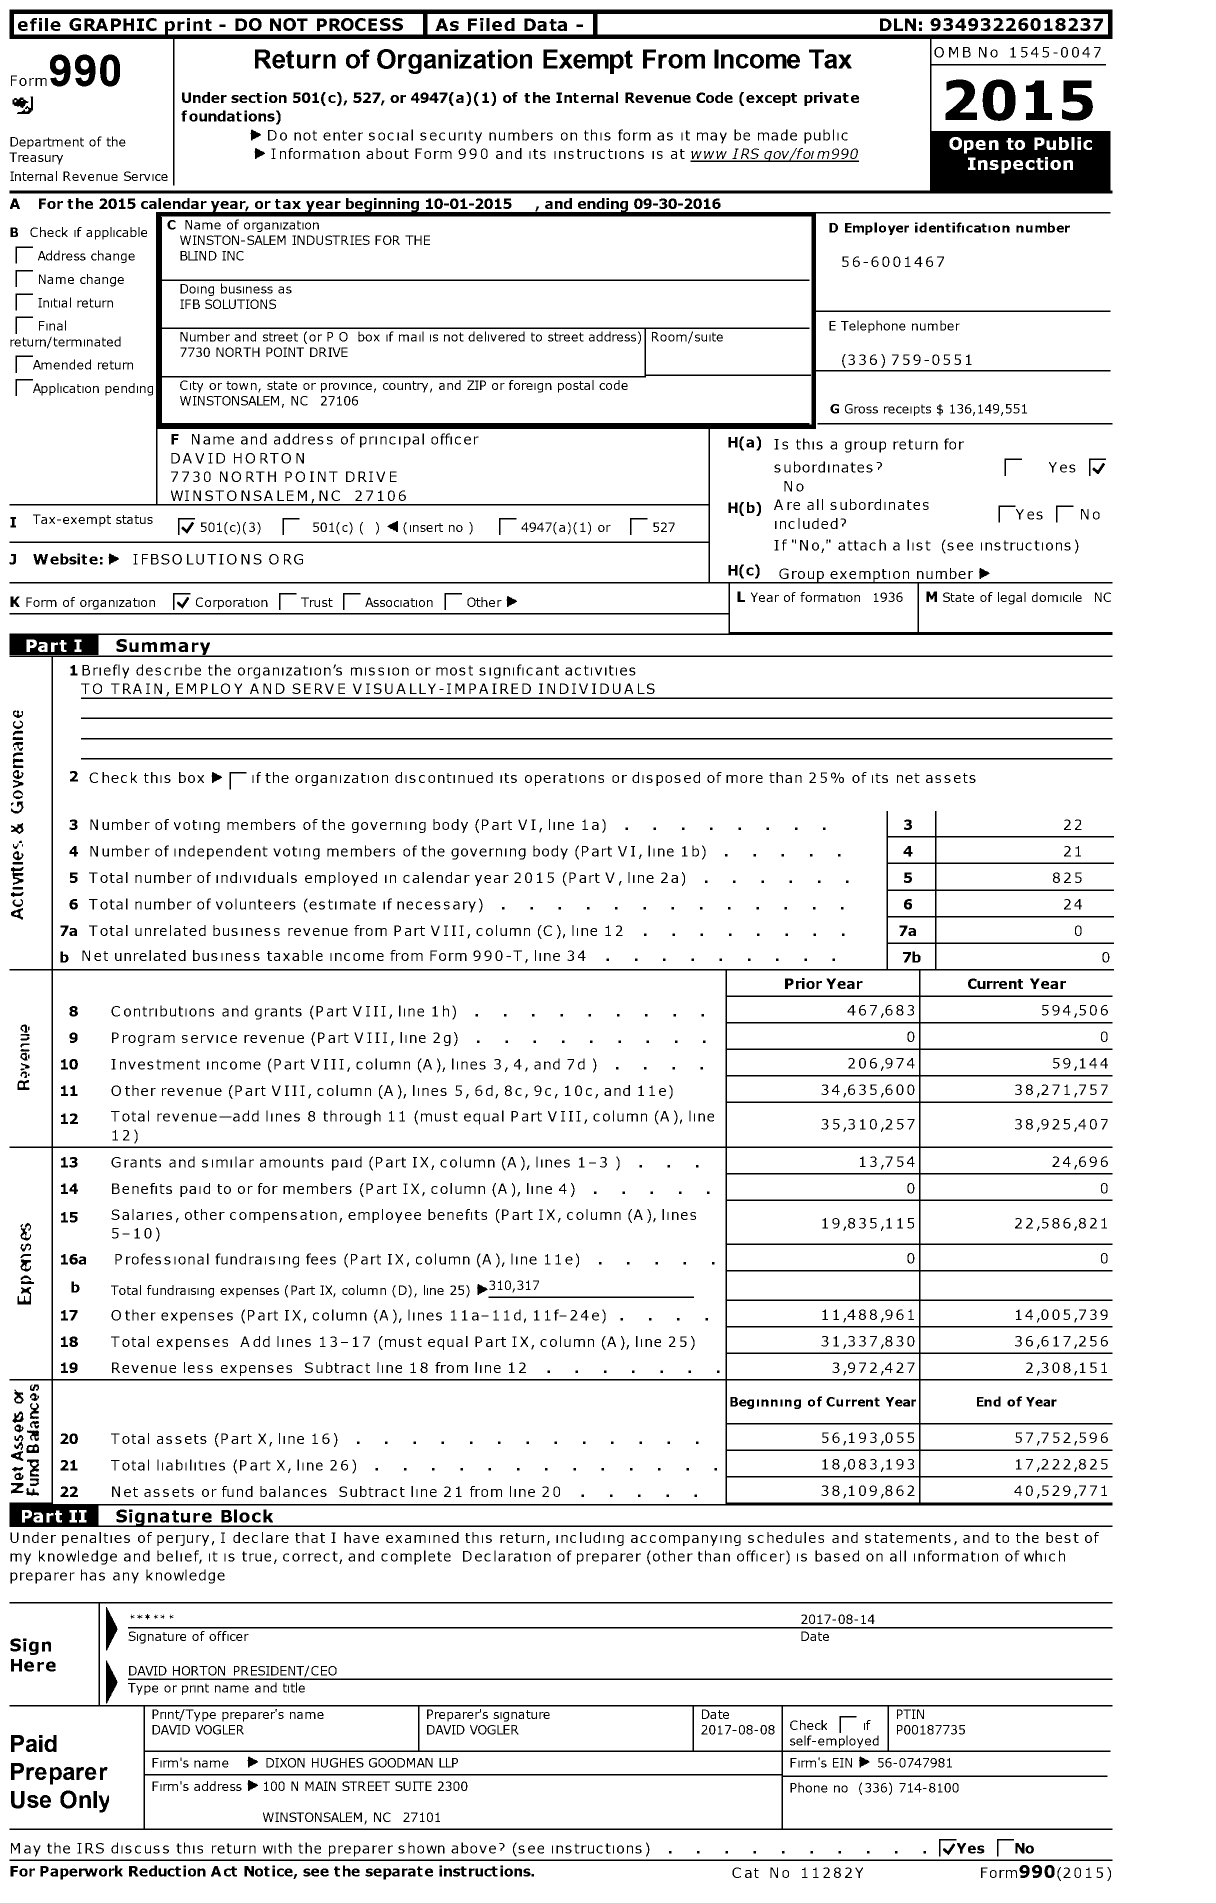 Image of first page of 2015 Form 990 for Ifb Solutions (IFB)